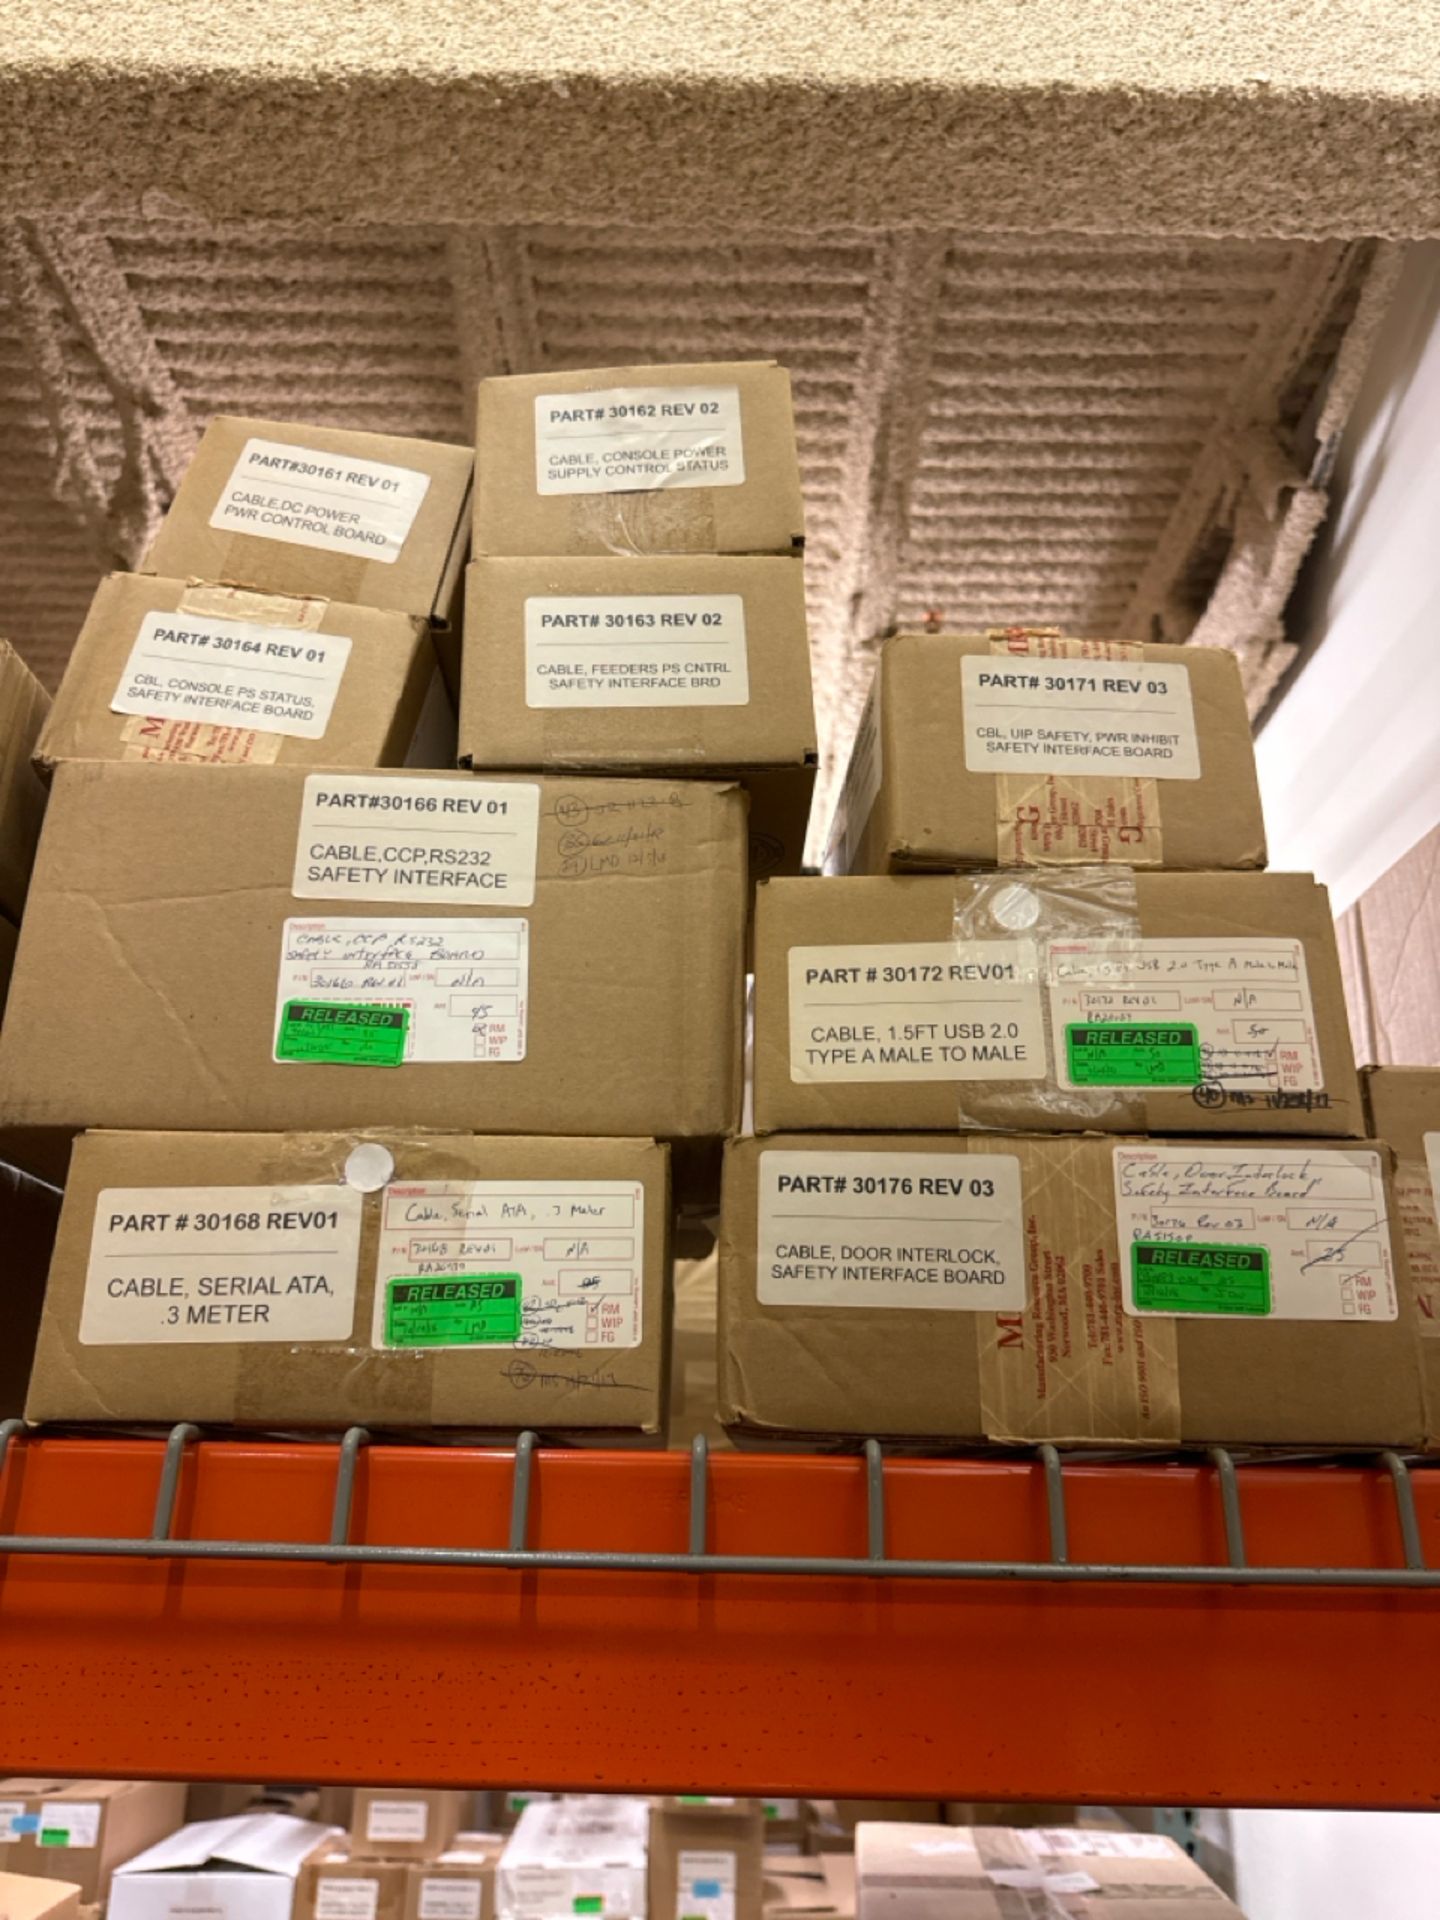 Contents of Pallet Racking & Shelves - Image 70 of 132